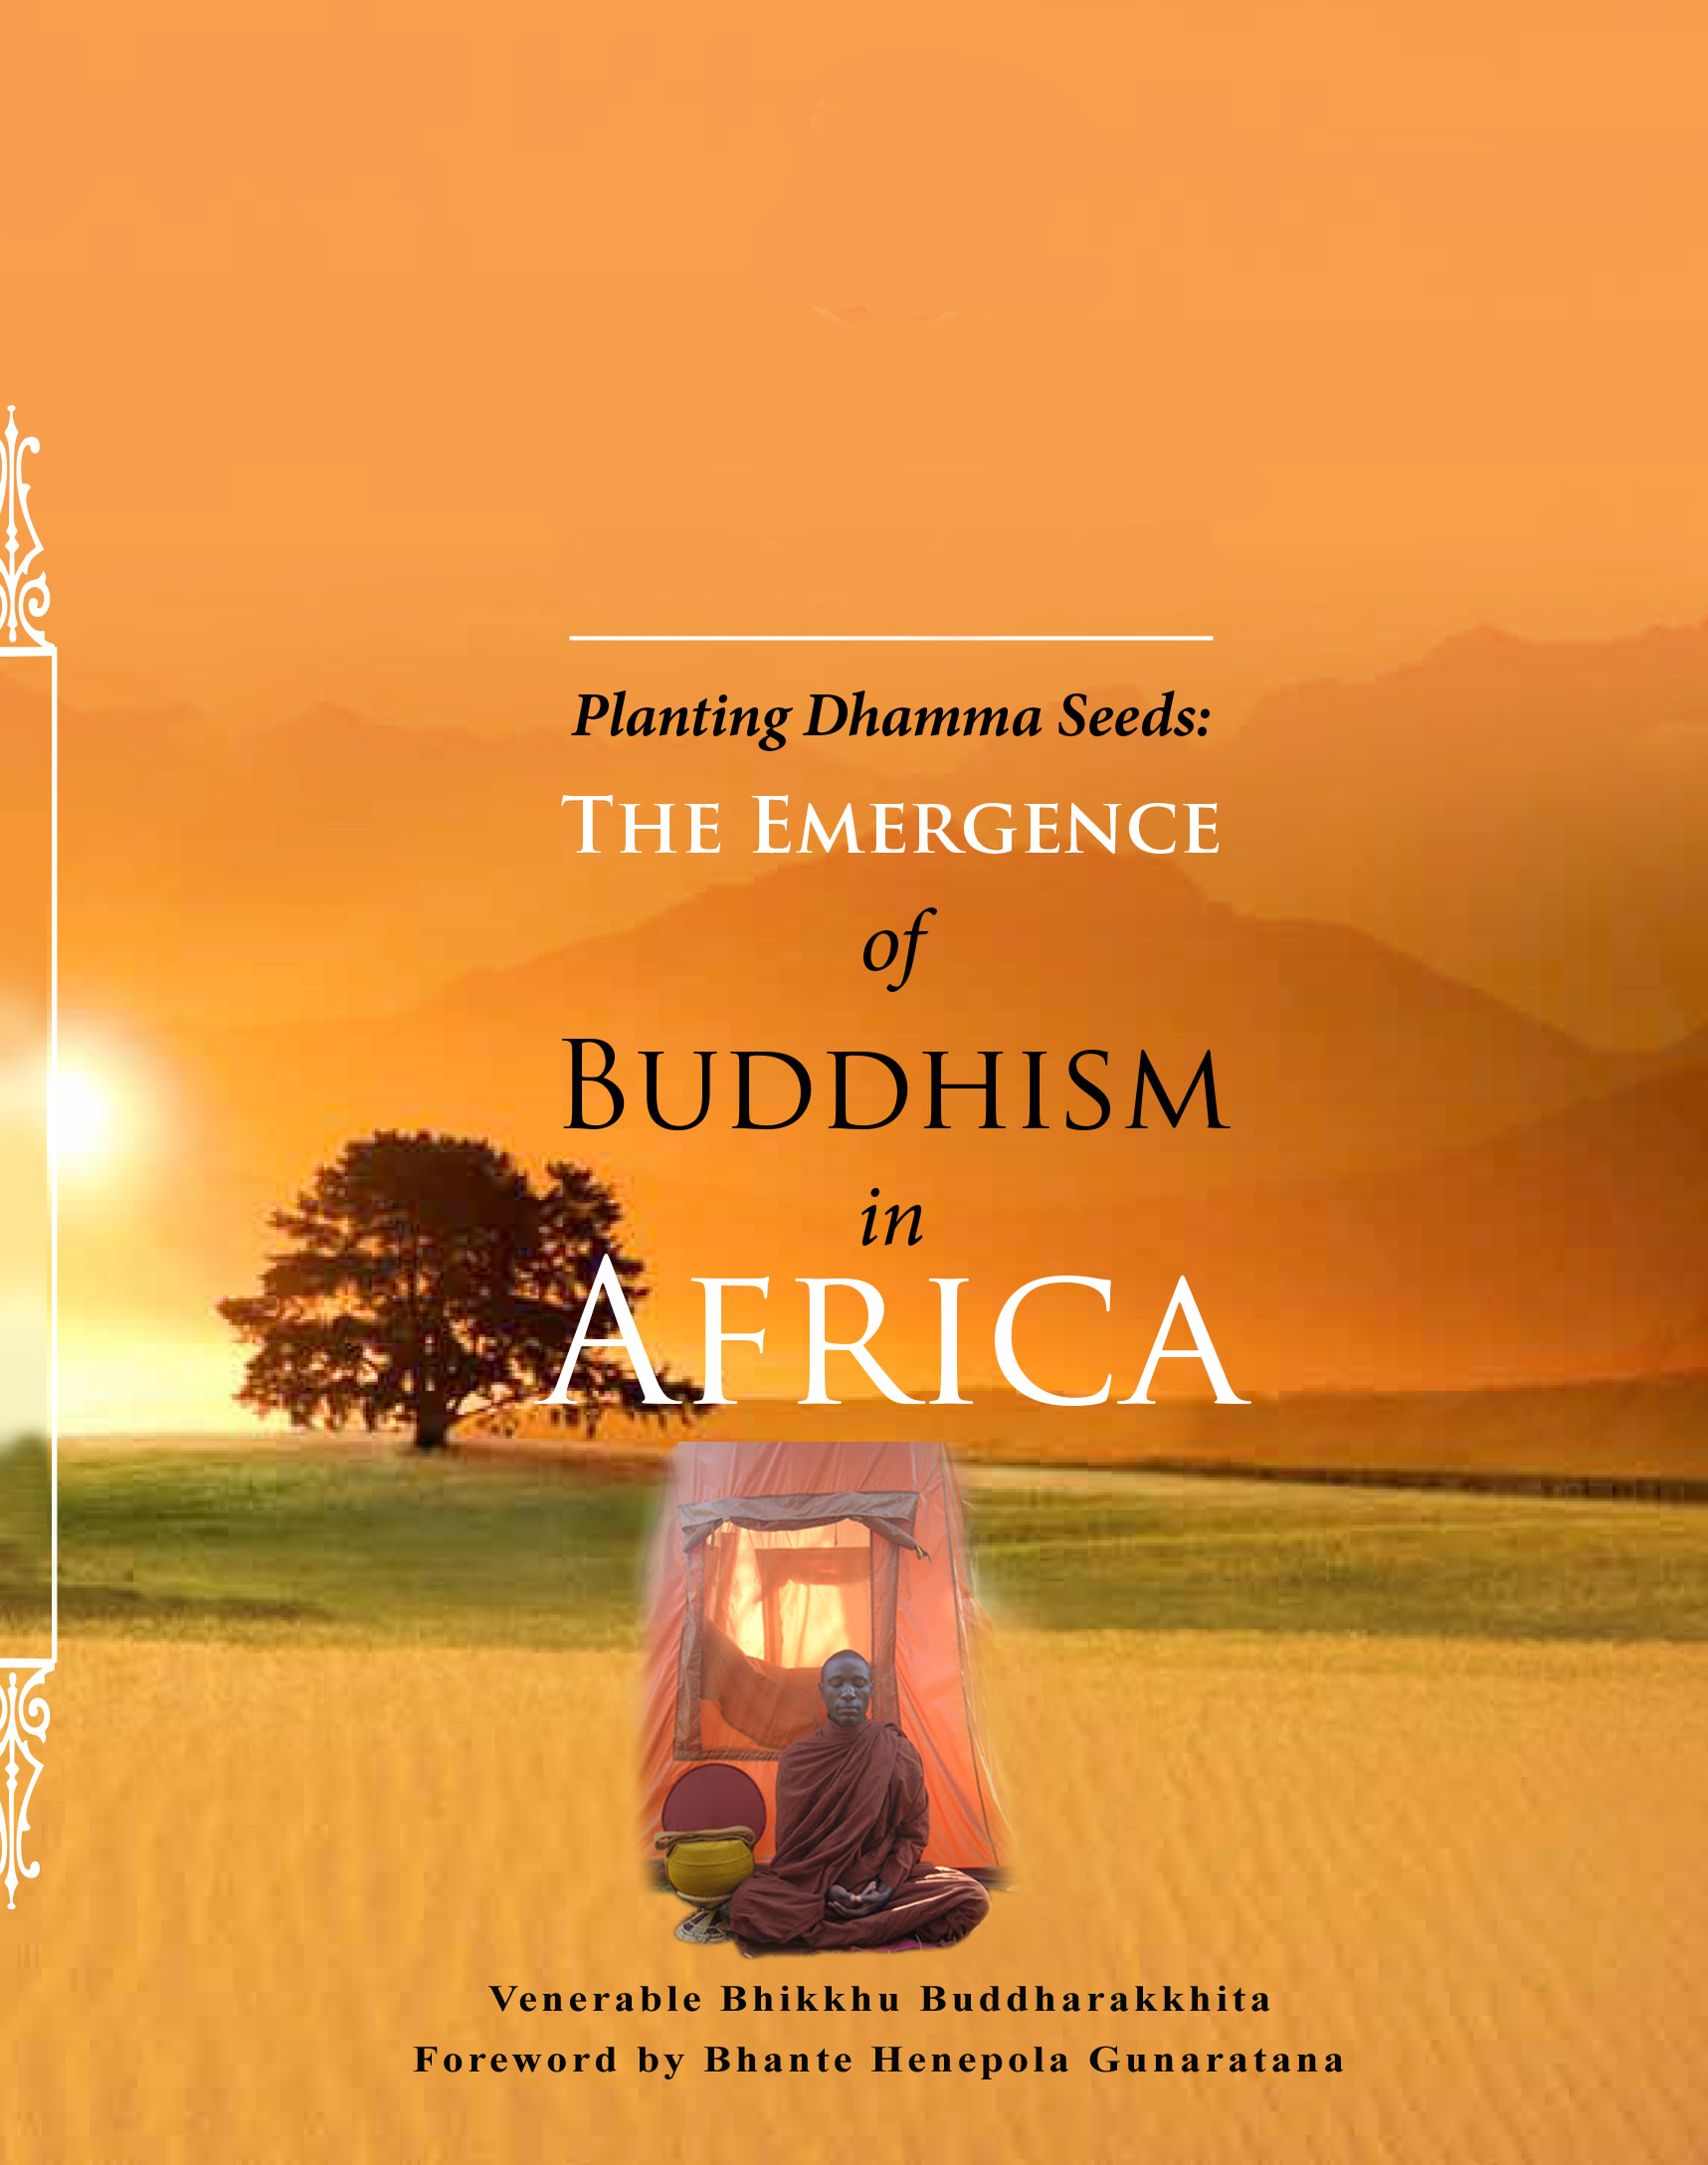 Planting Dhamma Seeds: The emergence of Buddhism in Africa